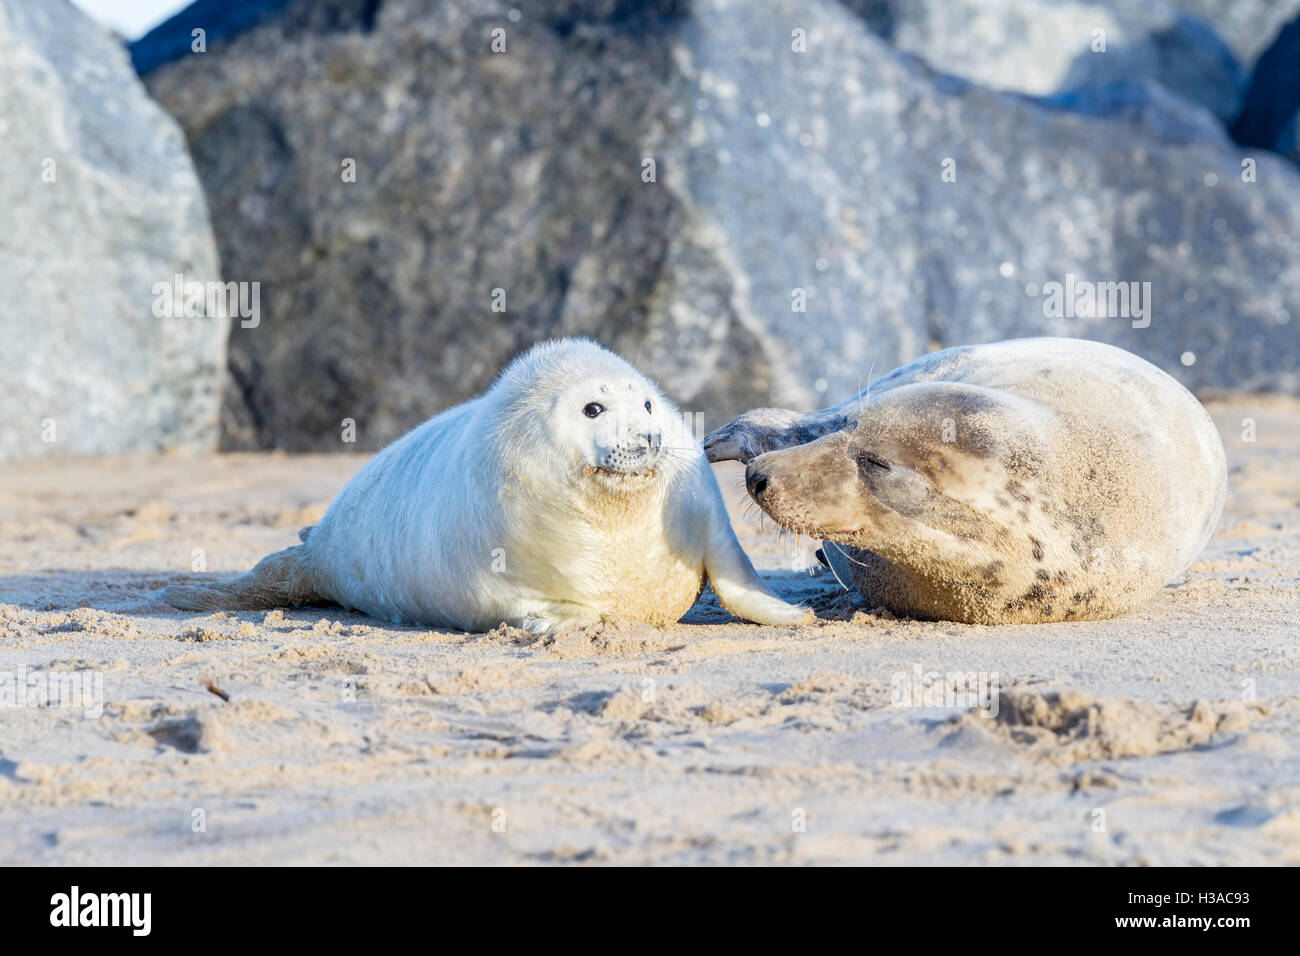 A Grey seal pup still in white natal fur is groomed by its mum on the beach, North Sea coast, Norfolk, England Stock Photo